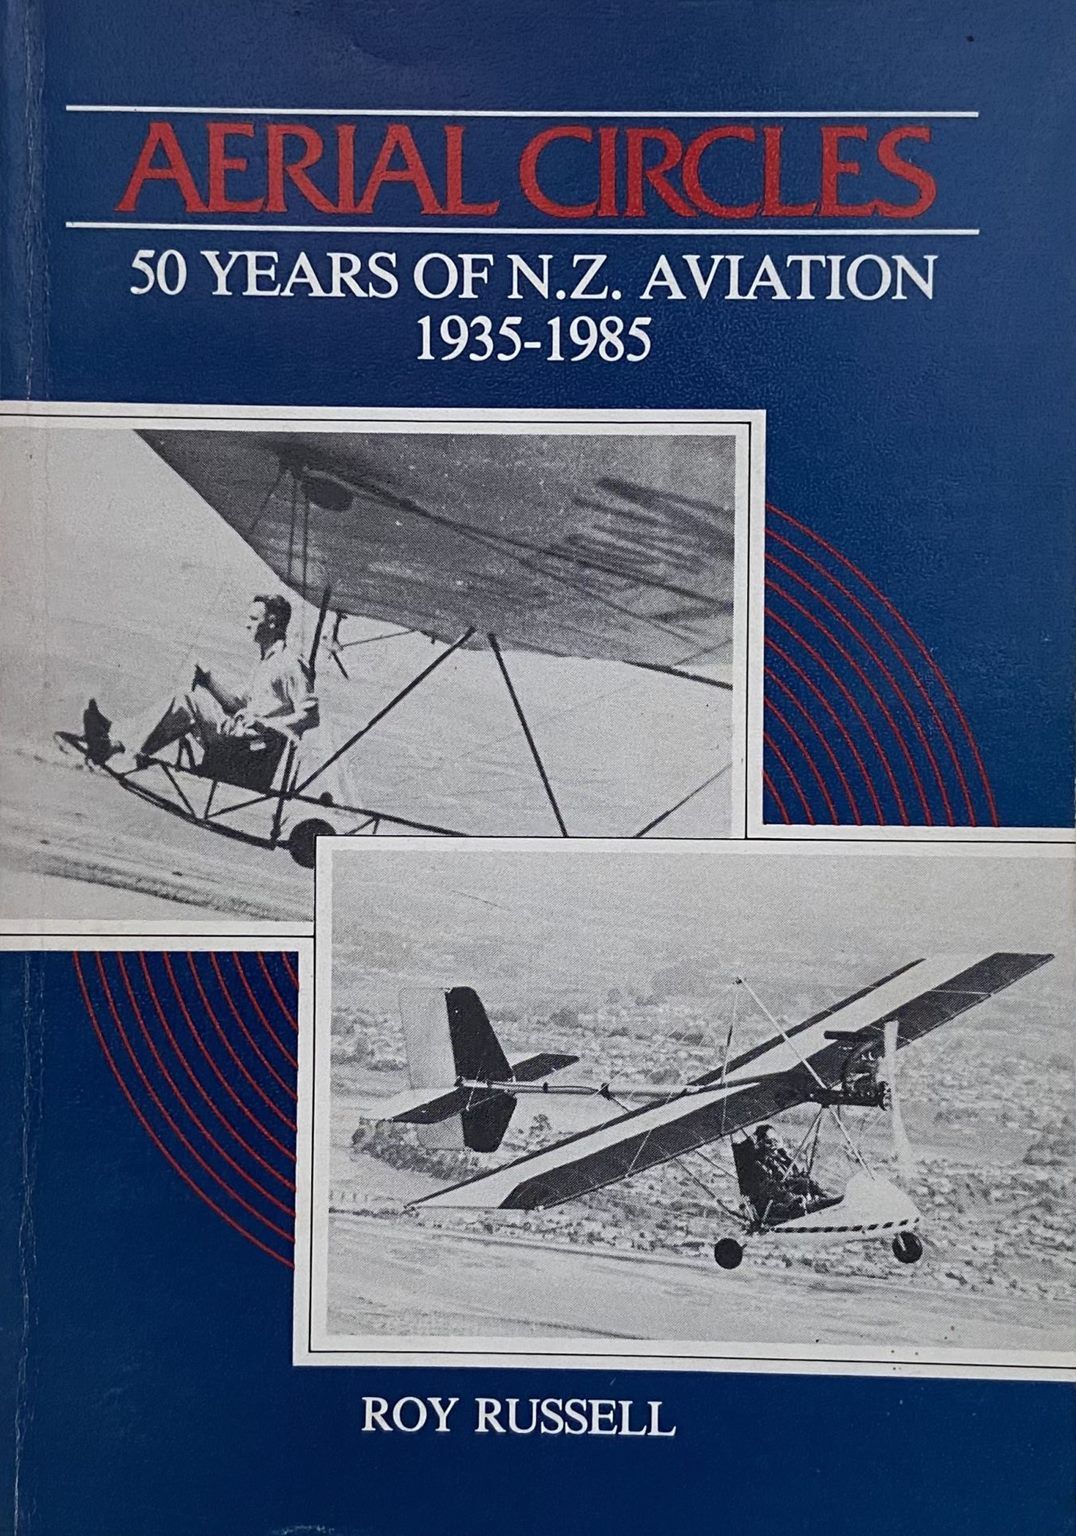 AERIAL CIRCLES: 50 years of NZ aviation 1935-1985